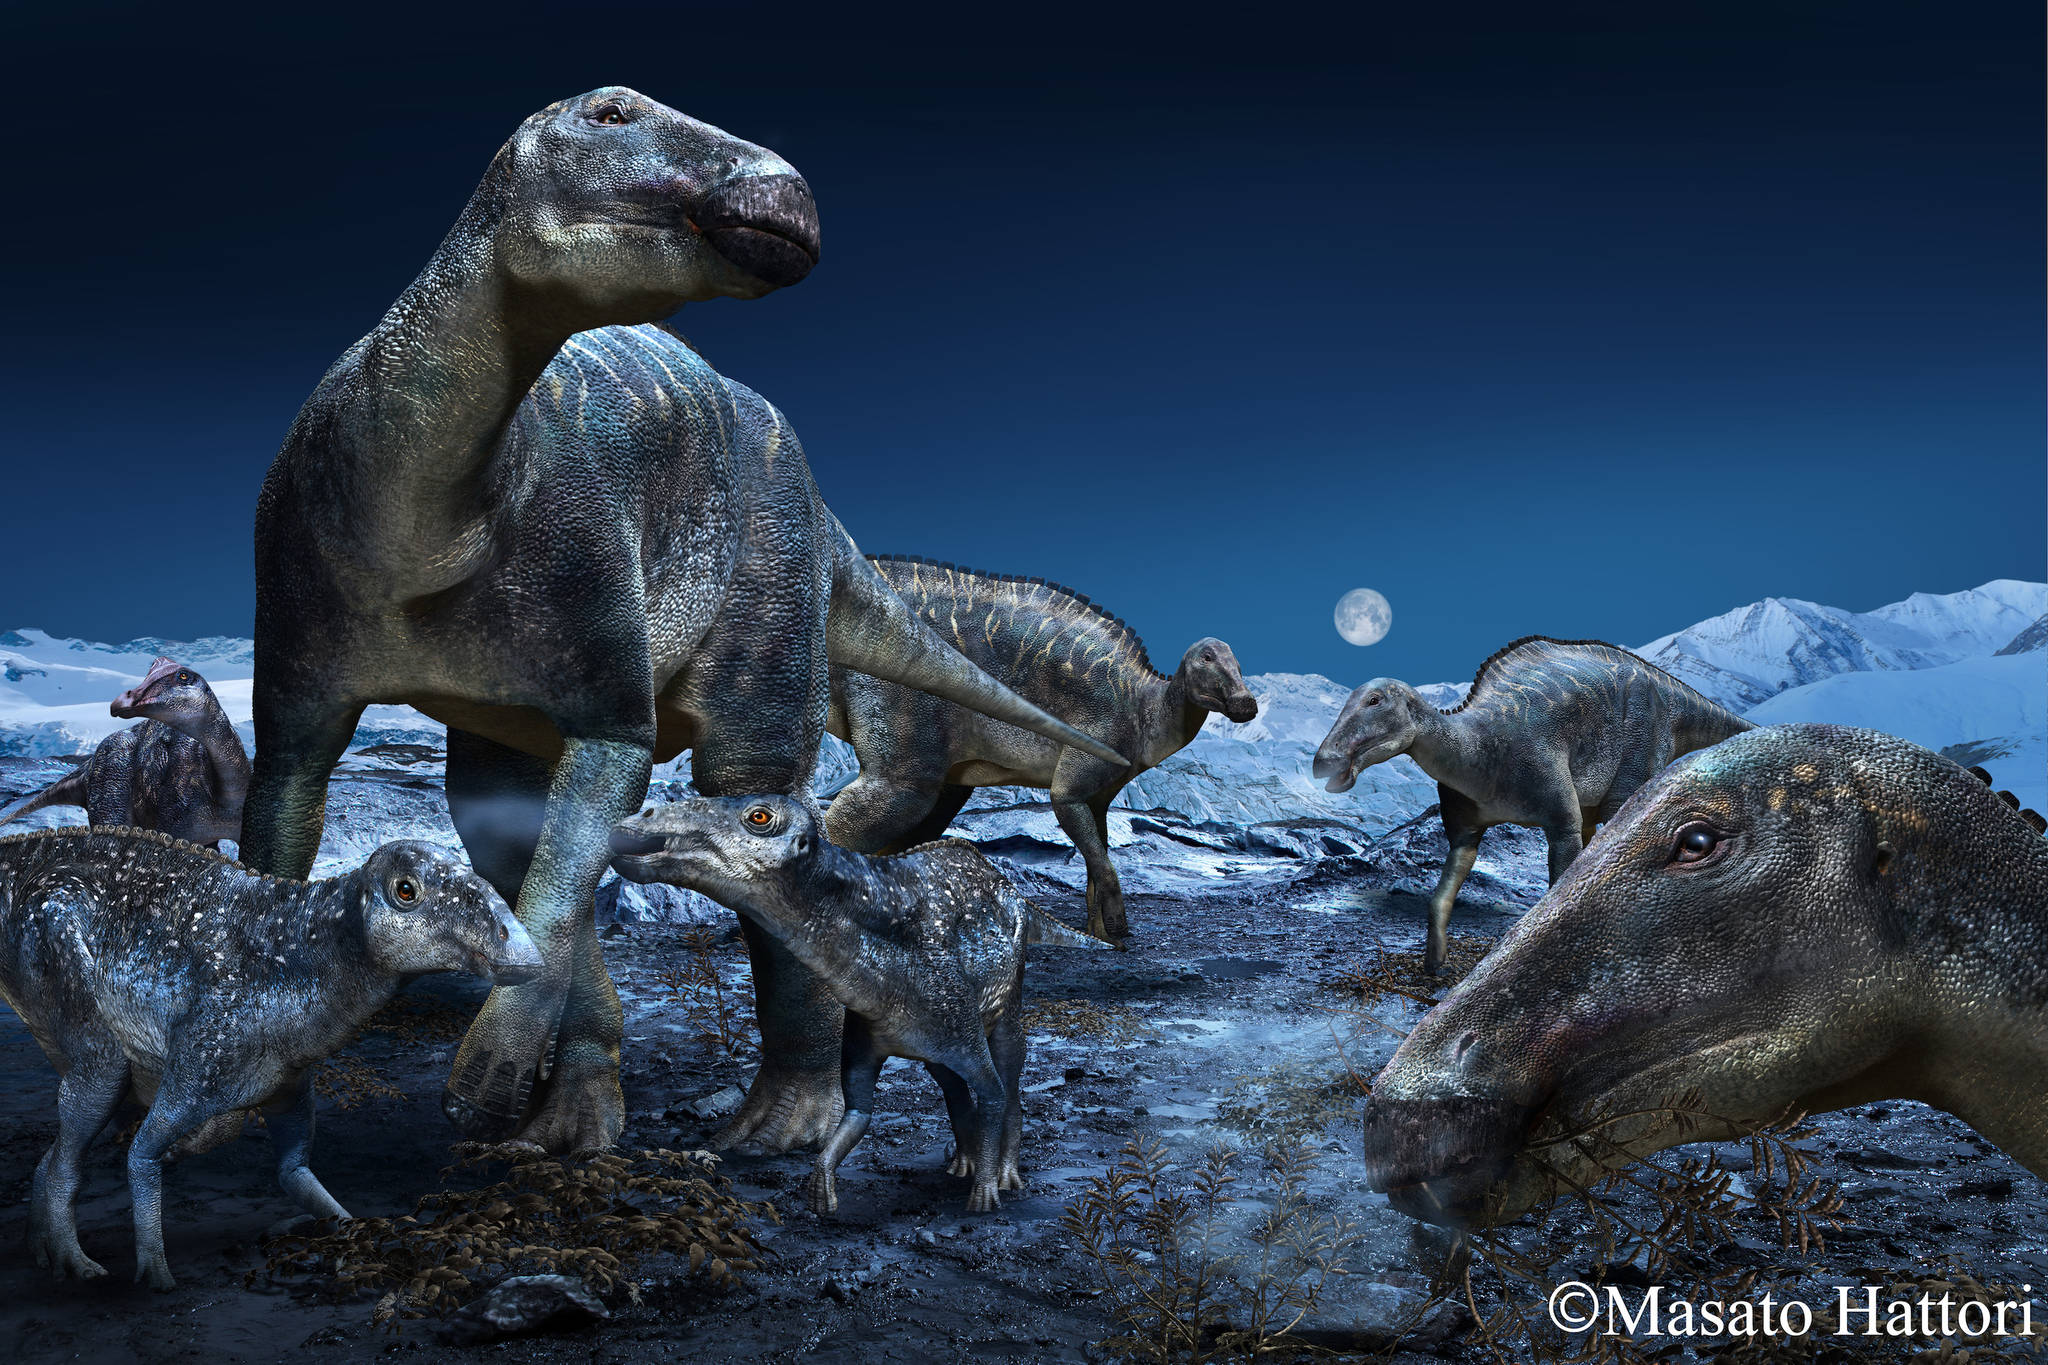 Courtesy Image | Masato Hattori                                 An artist’s rendering depicts a duck-billed, plant-eating dinosaur that was once common from Alaska to Colorado.